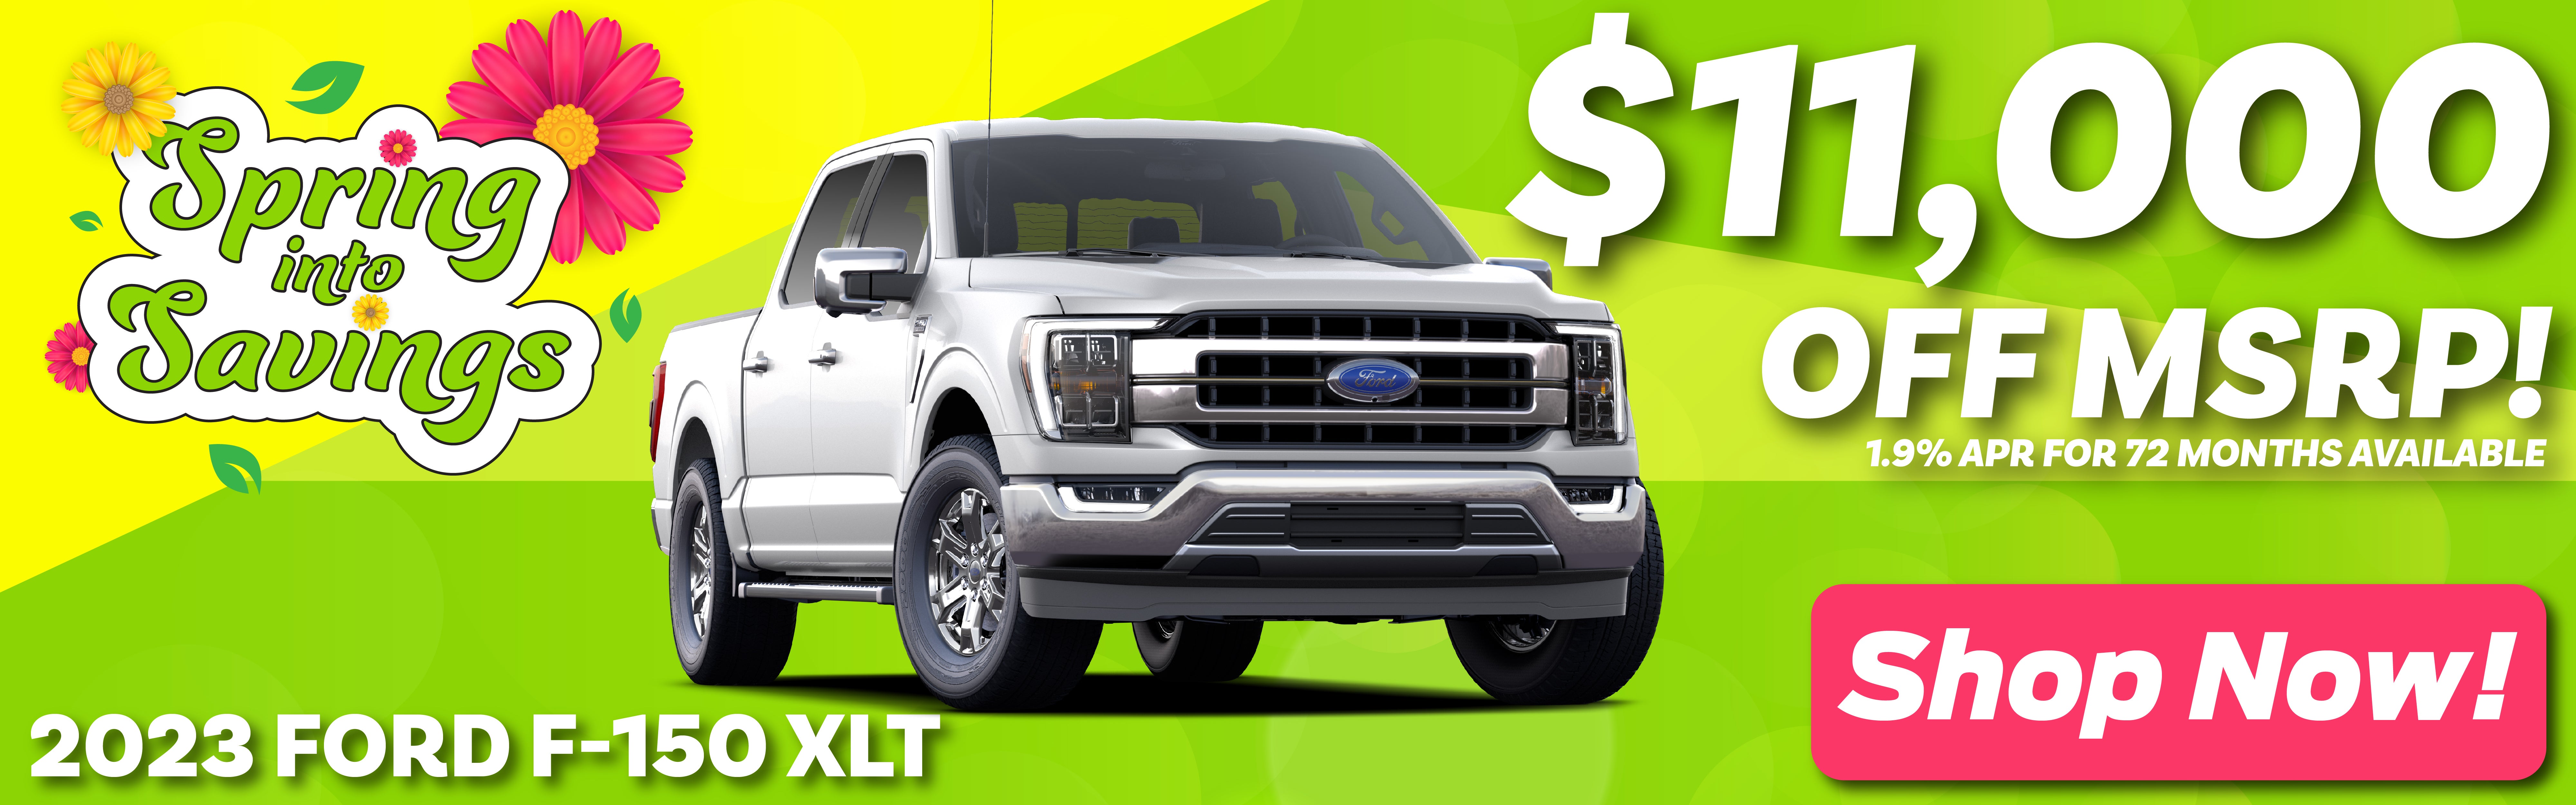 2023 Ford F150 XLTs